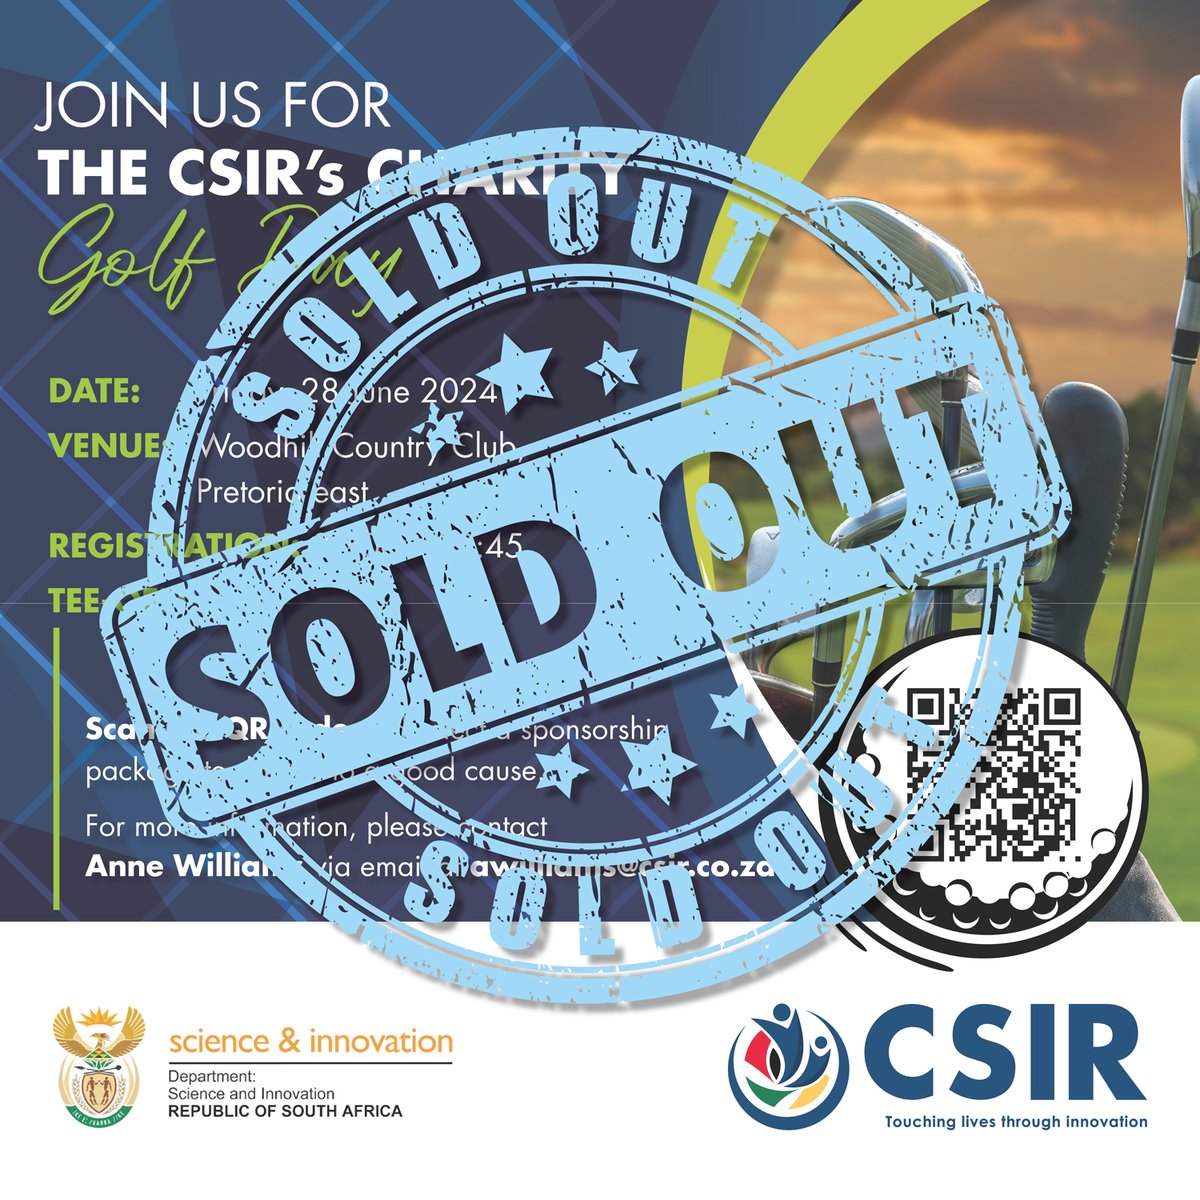 We are excited to announce that the #TeamCSIR Inaugural Charity Golf Day to be held on Friday, 28 June 2024, at the Woodhill Country Club in Pretoria, has been sold out!
A warm thank you to our sponsors, we look forward to a fun-filled day.